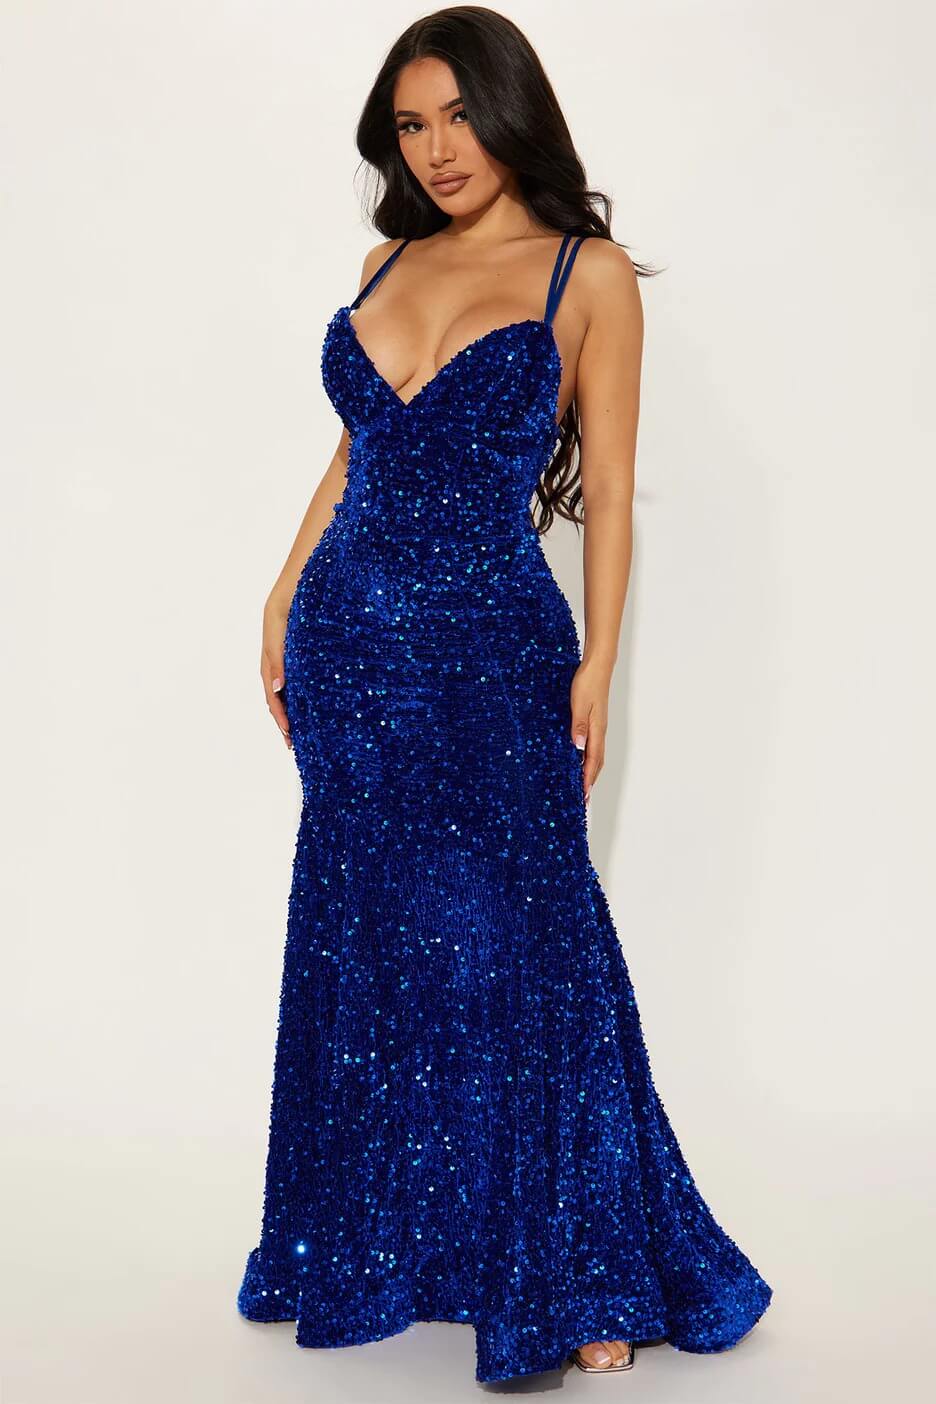 DELUXE Royal And Fabulous Sequin Gown